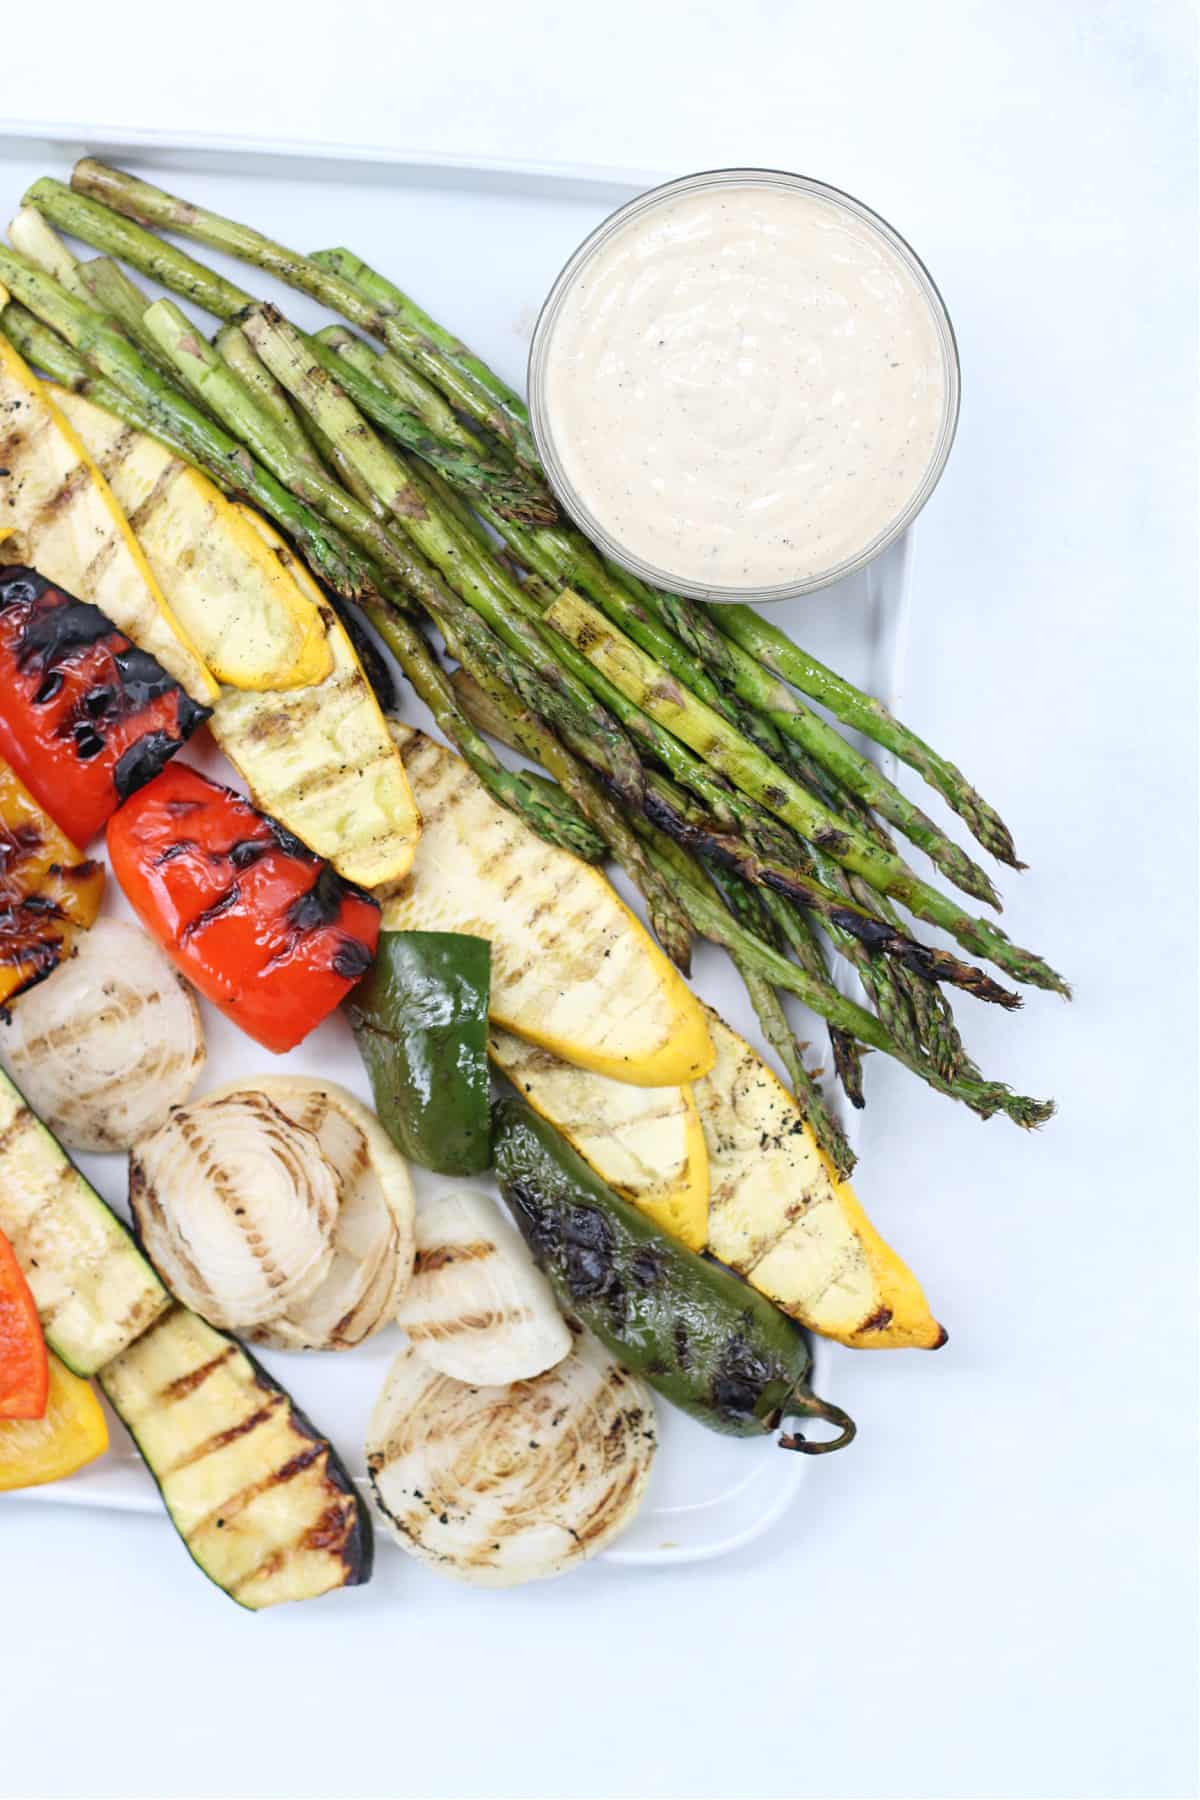 Best way to grill summer Vegetables